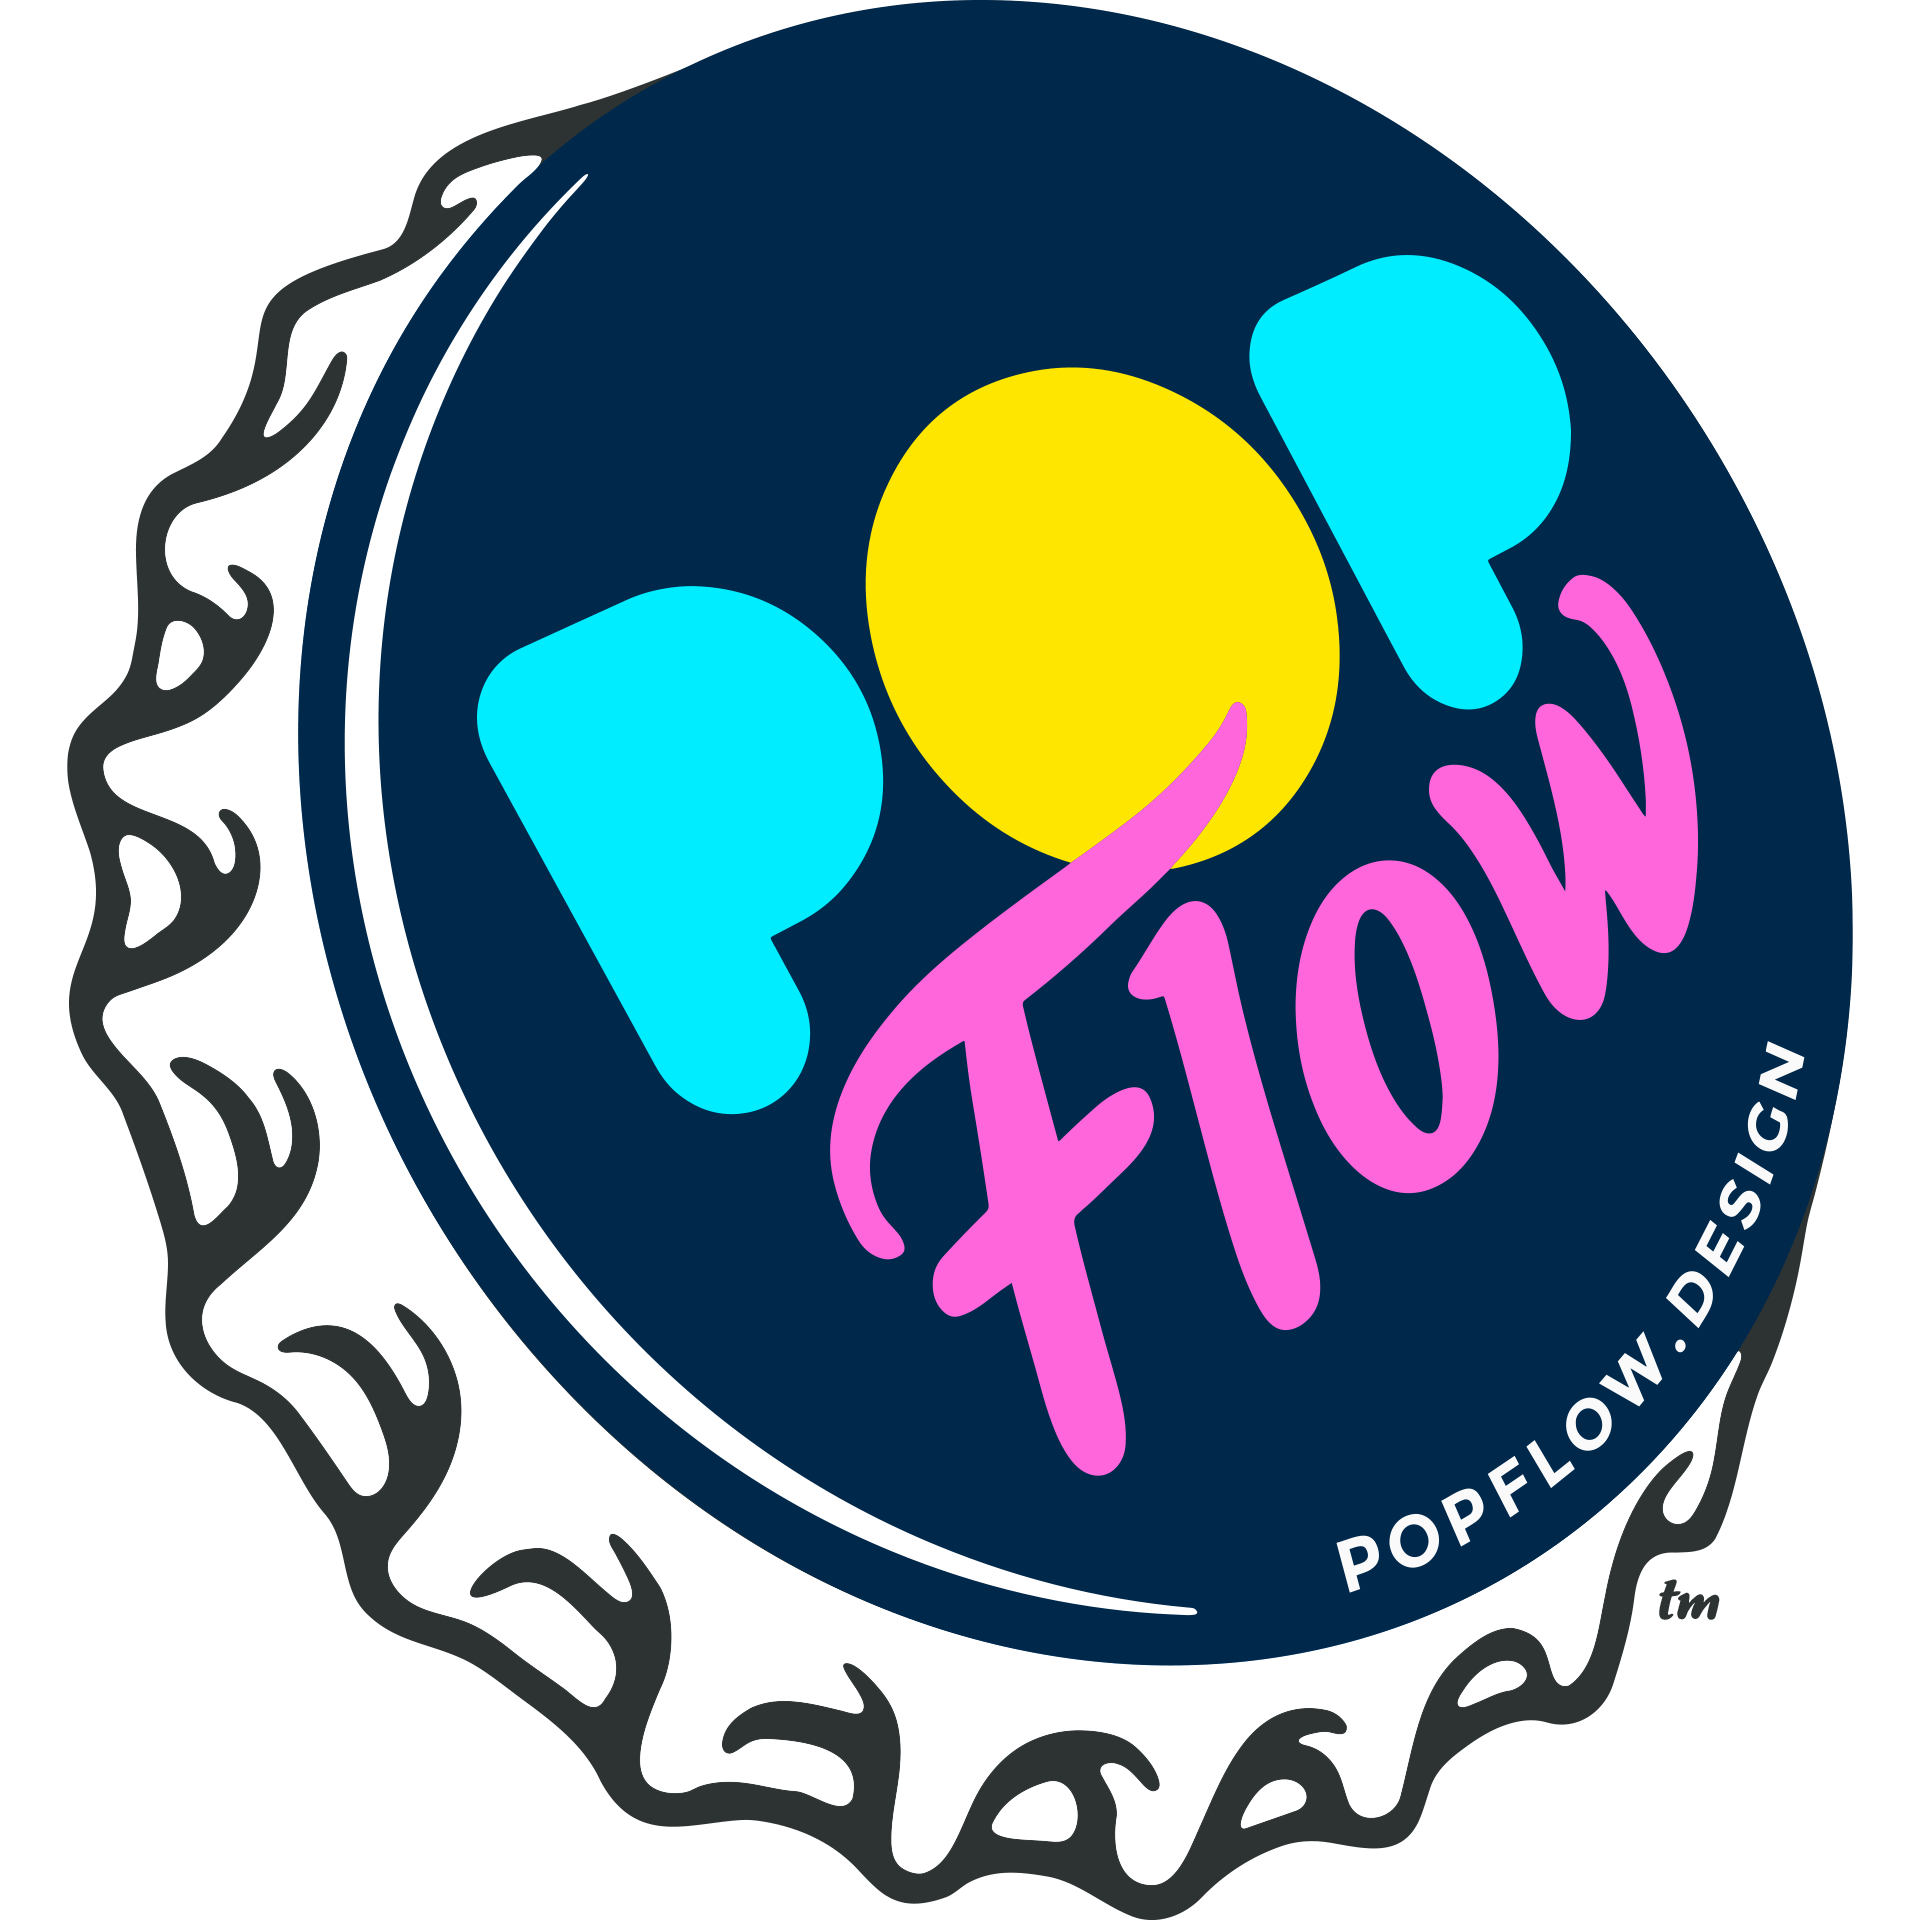 POPflow Design LLC - UX/UI product design thinking and UX strategy consulting studio